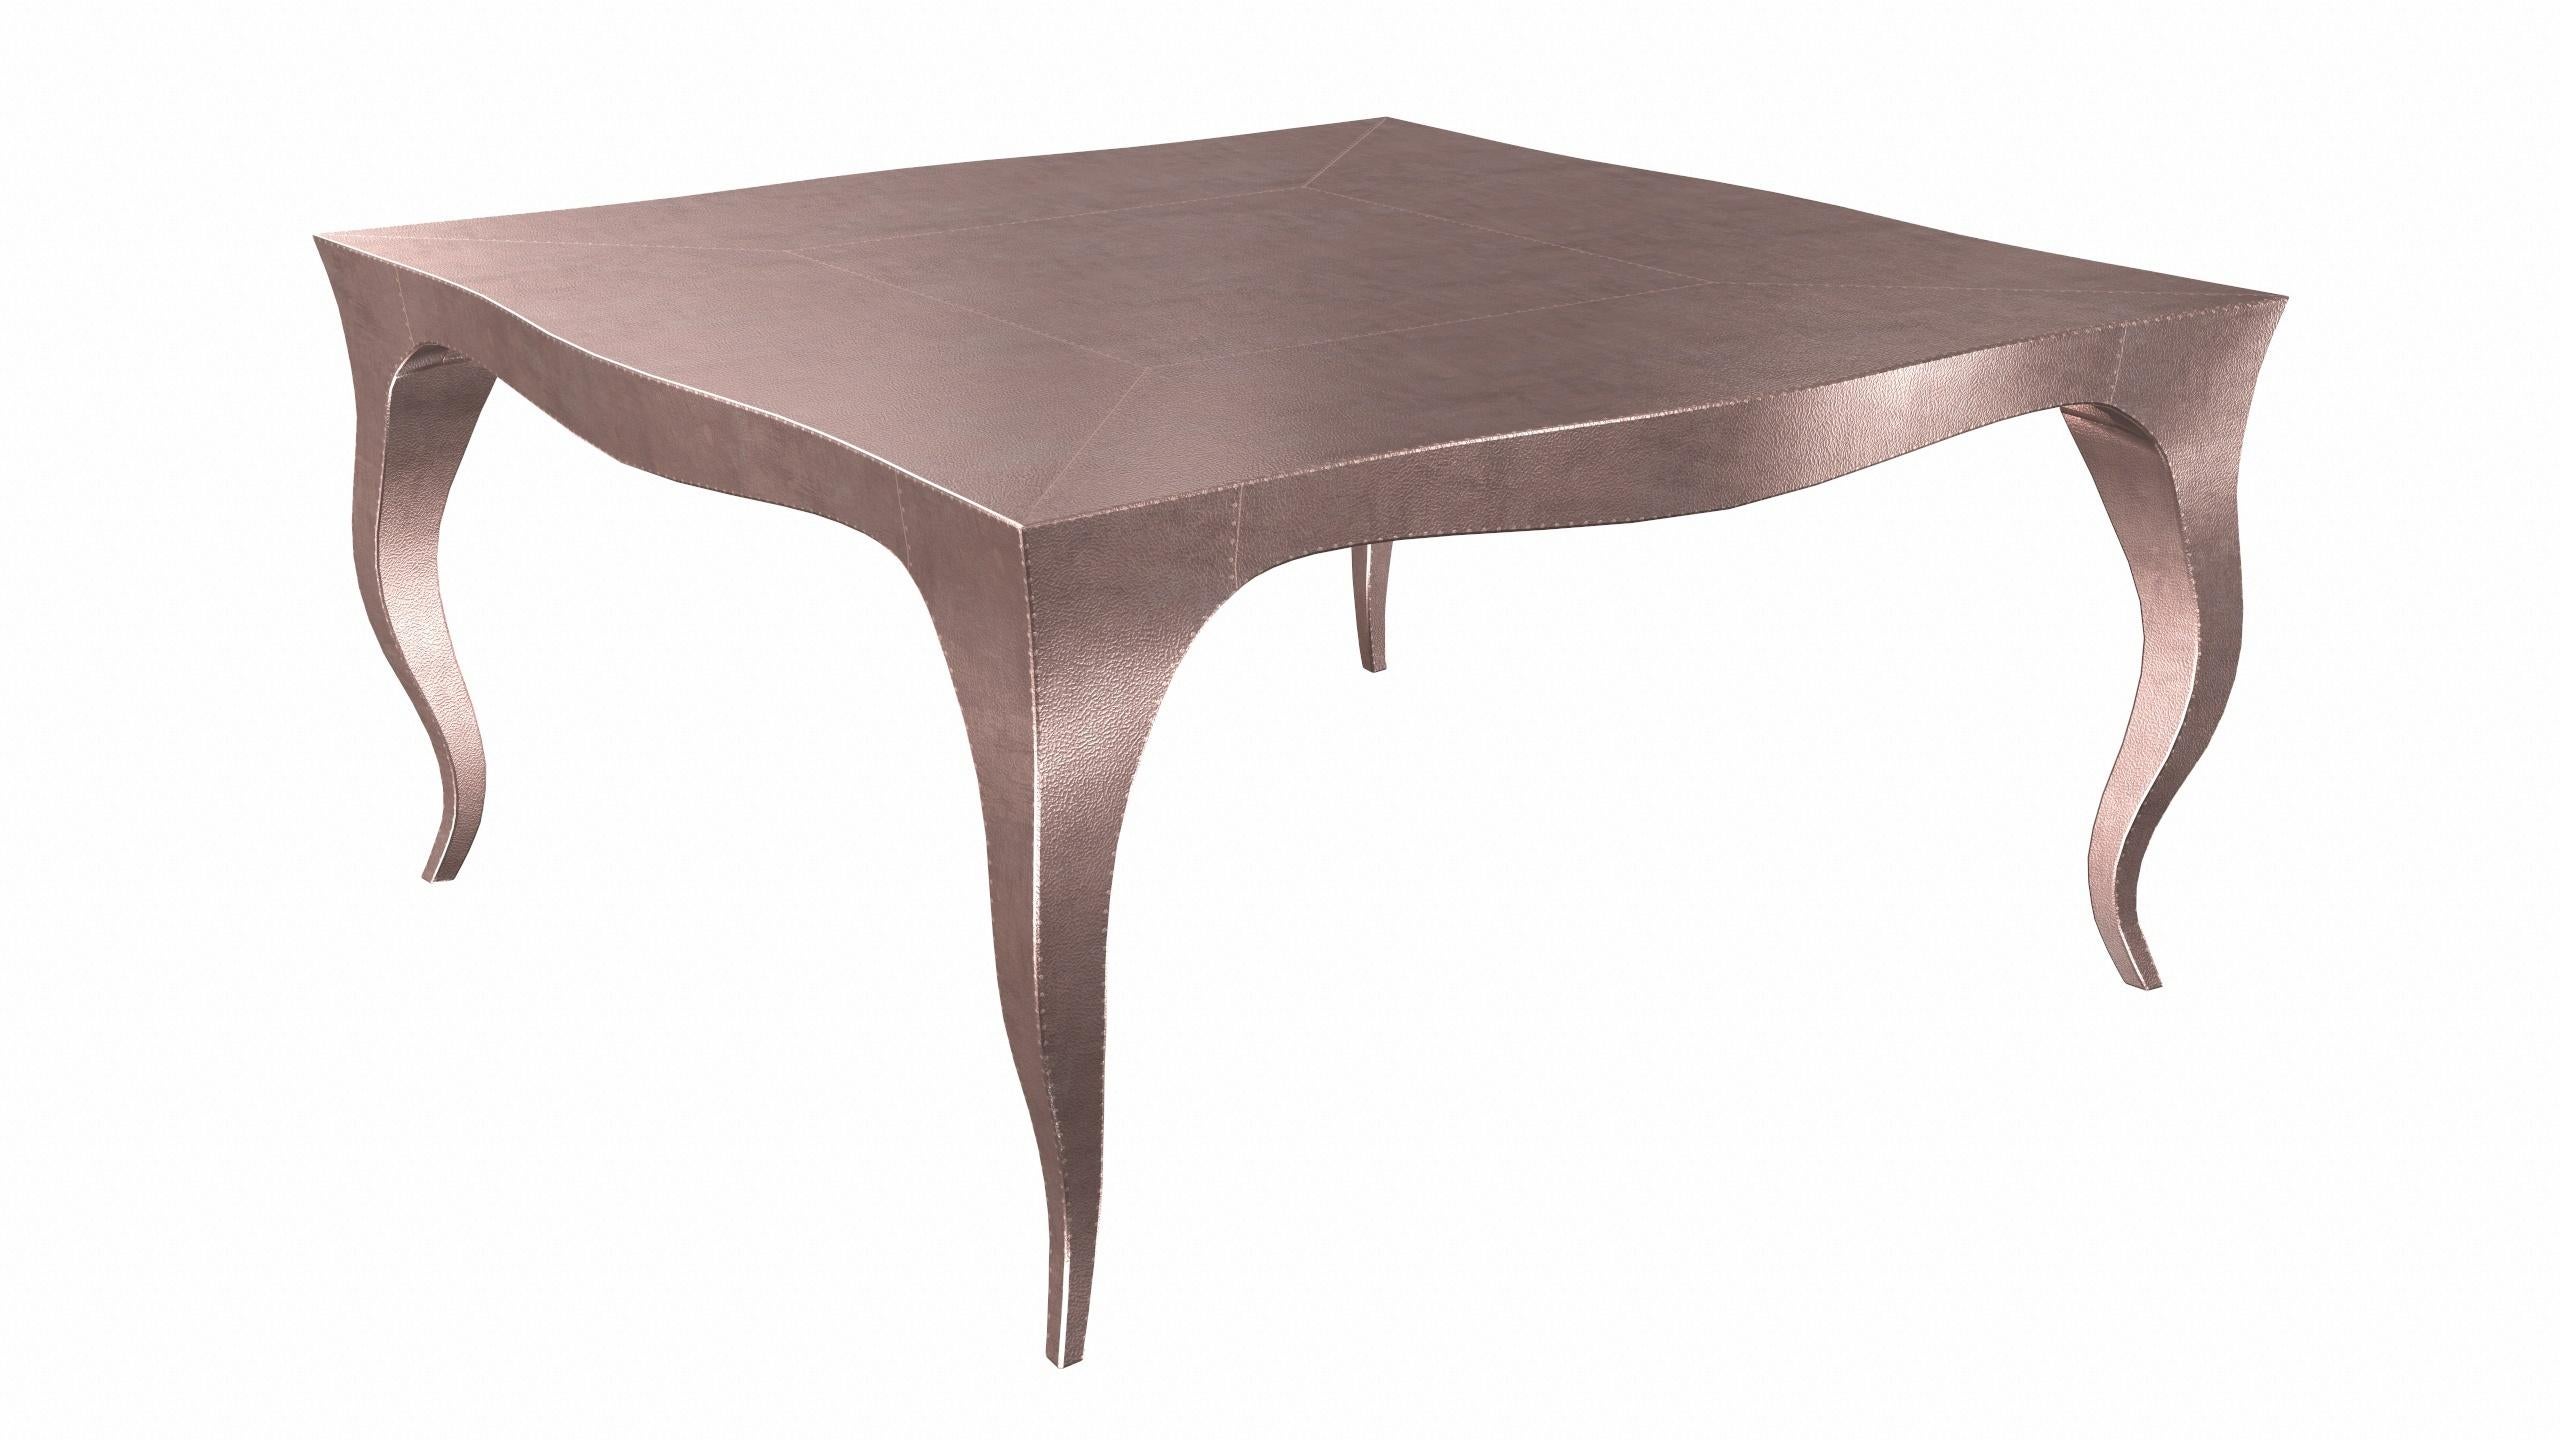 Hand-Carved Louise Art Deco Industrial and Work Tables Fine Hammered Copper by Paul Mathieu For Sale